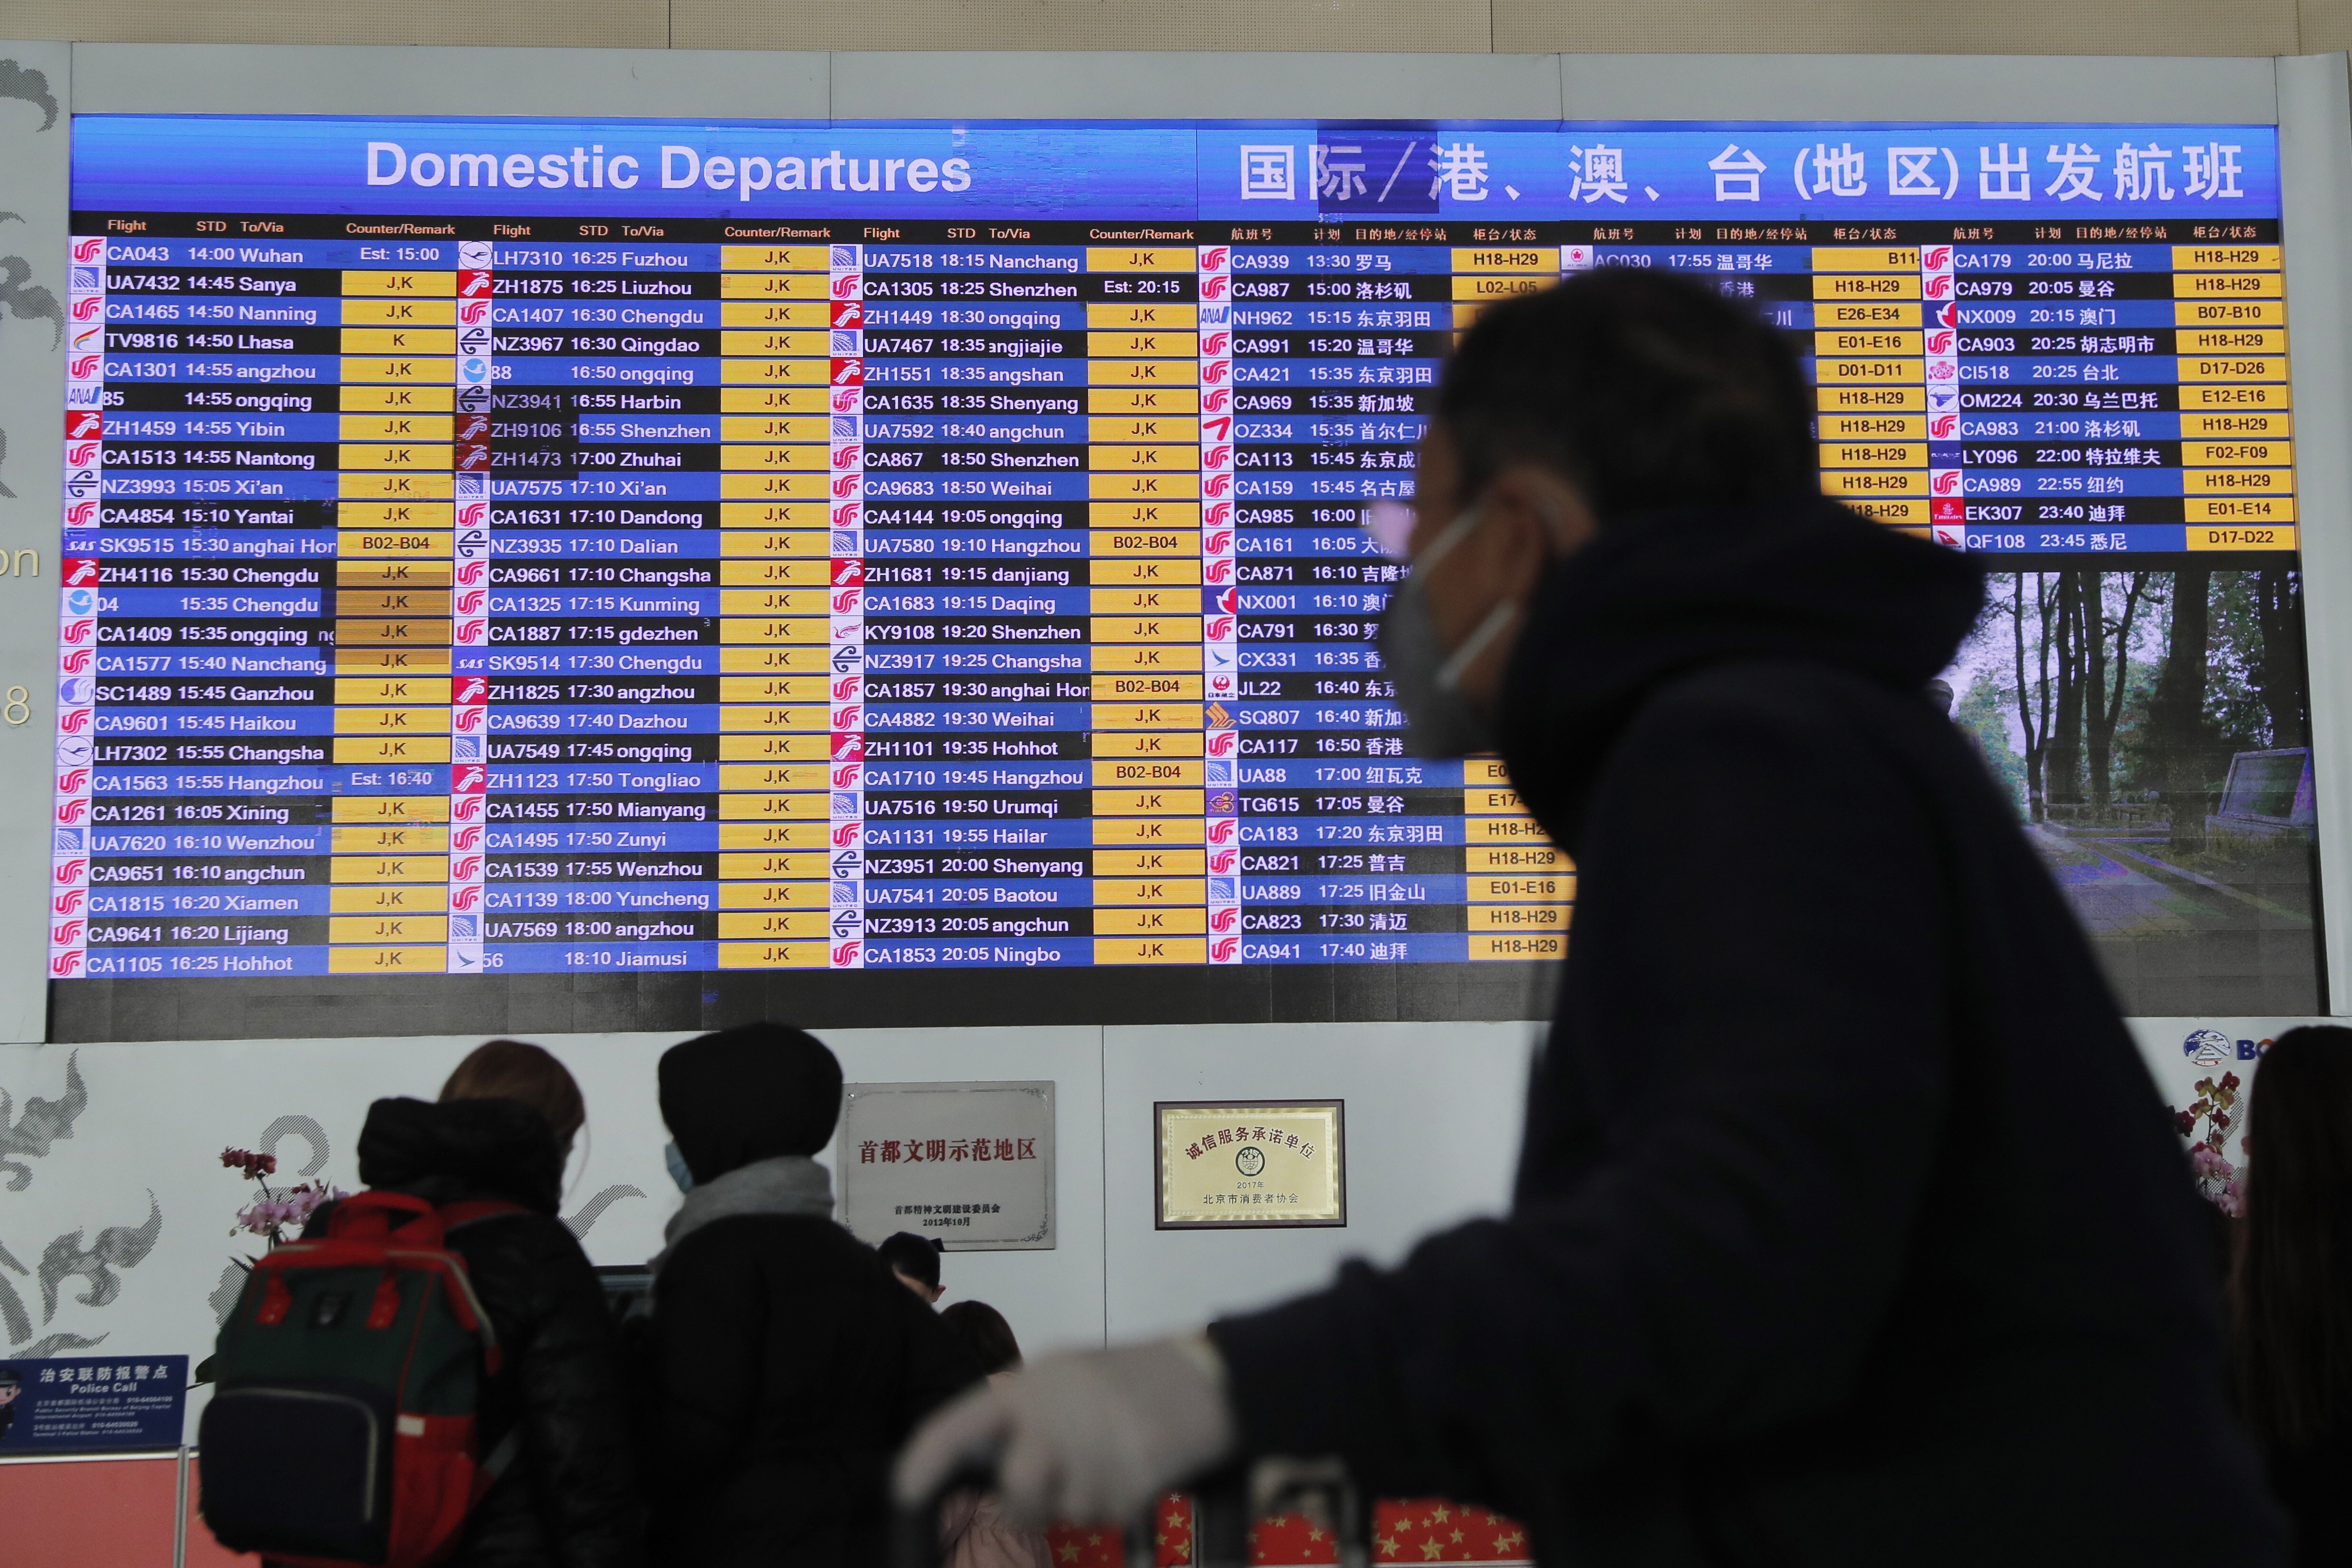 epa08165779 A passenger wears a mask passing by a departure information screen at terminal 3 of Beijing Capital International Airport in Beijing, China, 26 January 2020. Chinese official required all travel agencies to suspend the sale of all domestic and overseas group travel products due to coronavirus outbreak. EPA-EFE/WU HONG